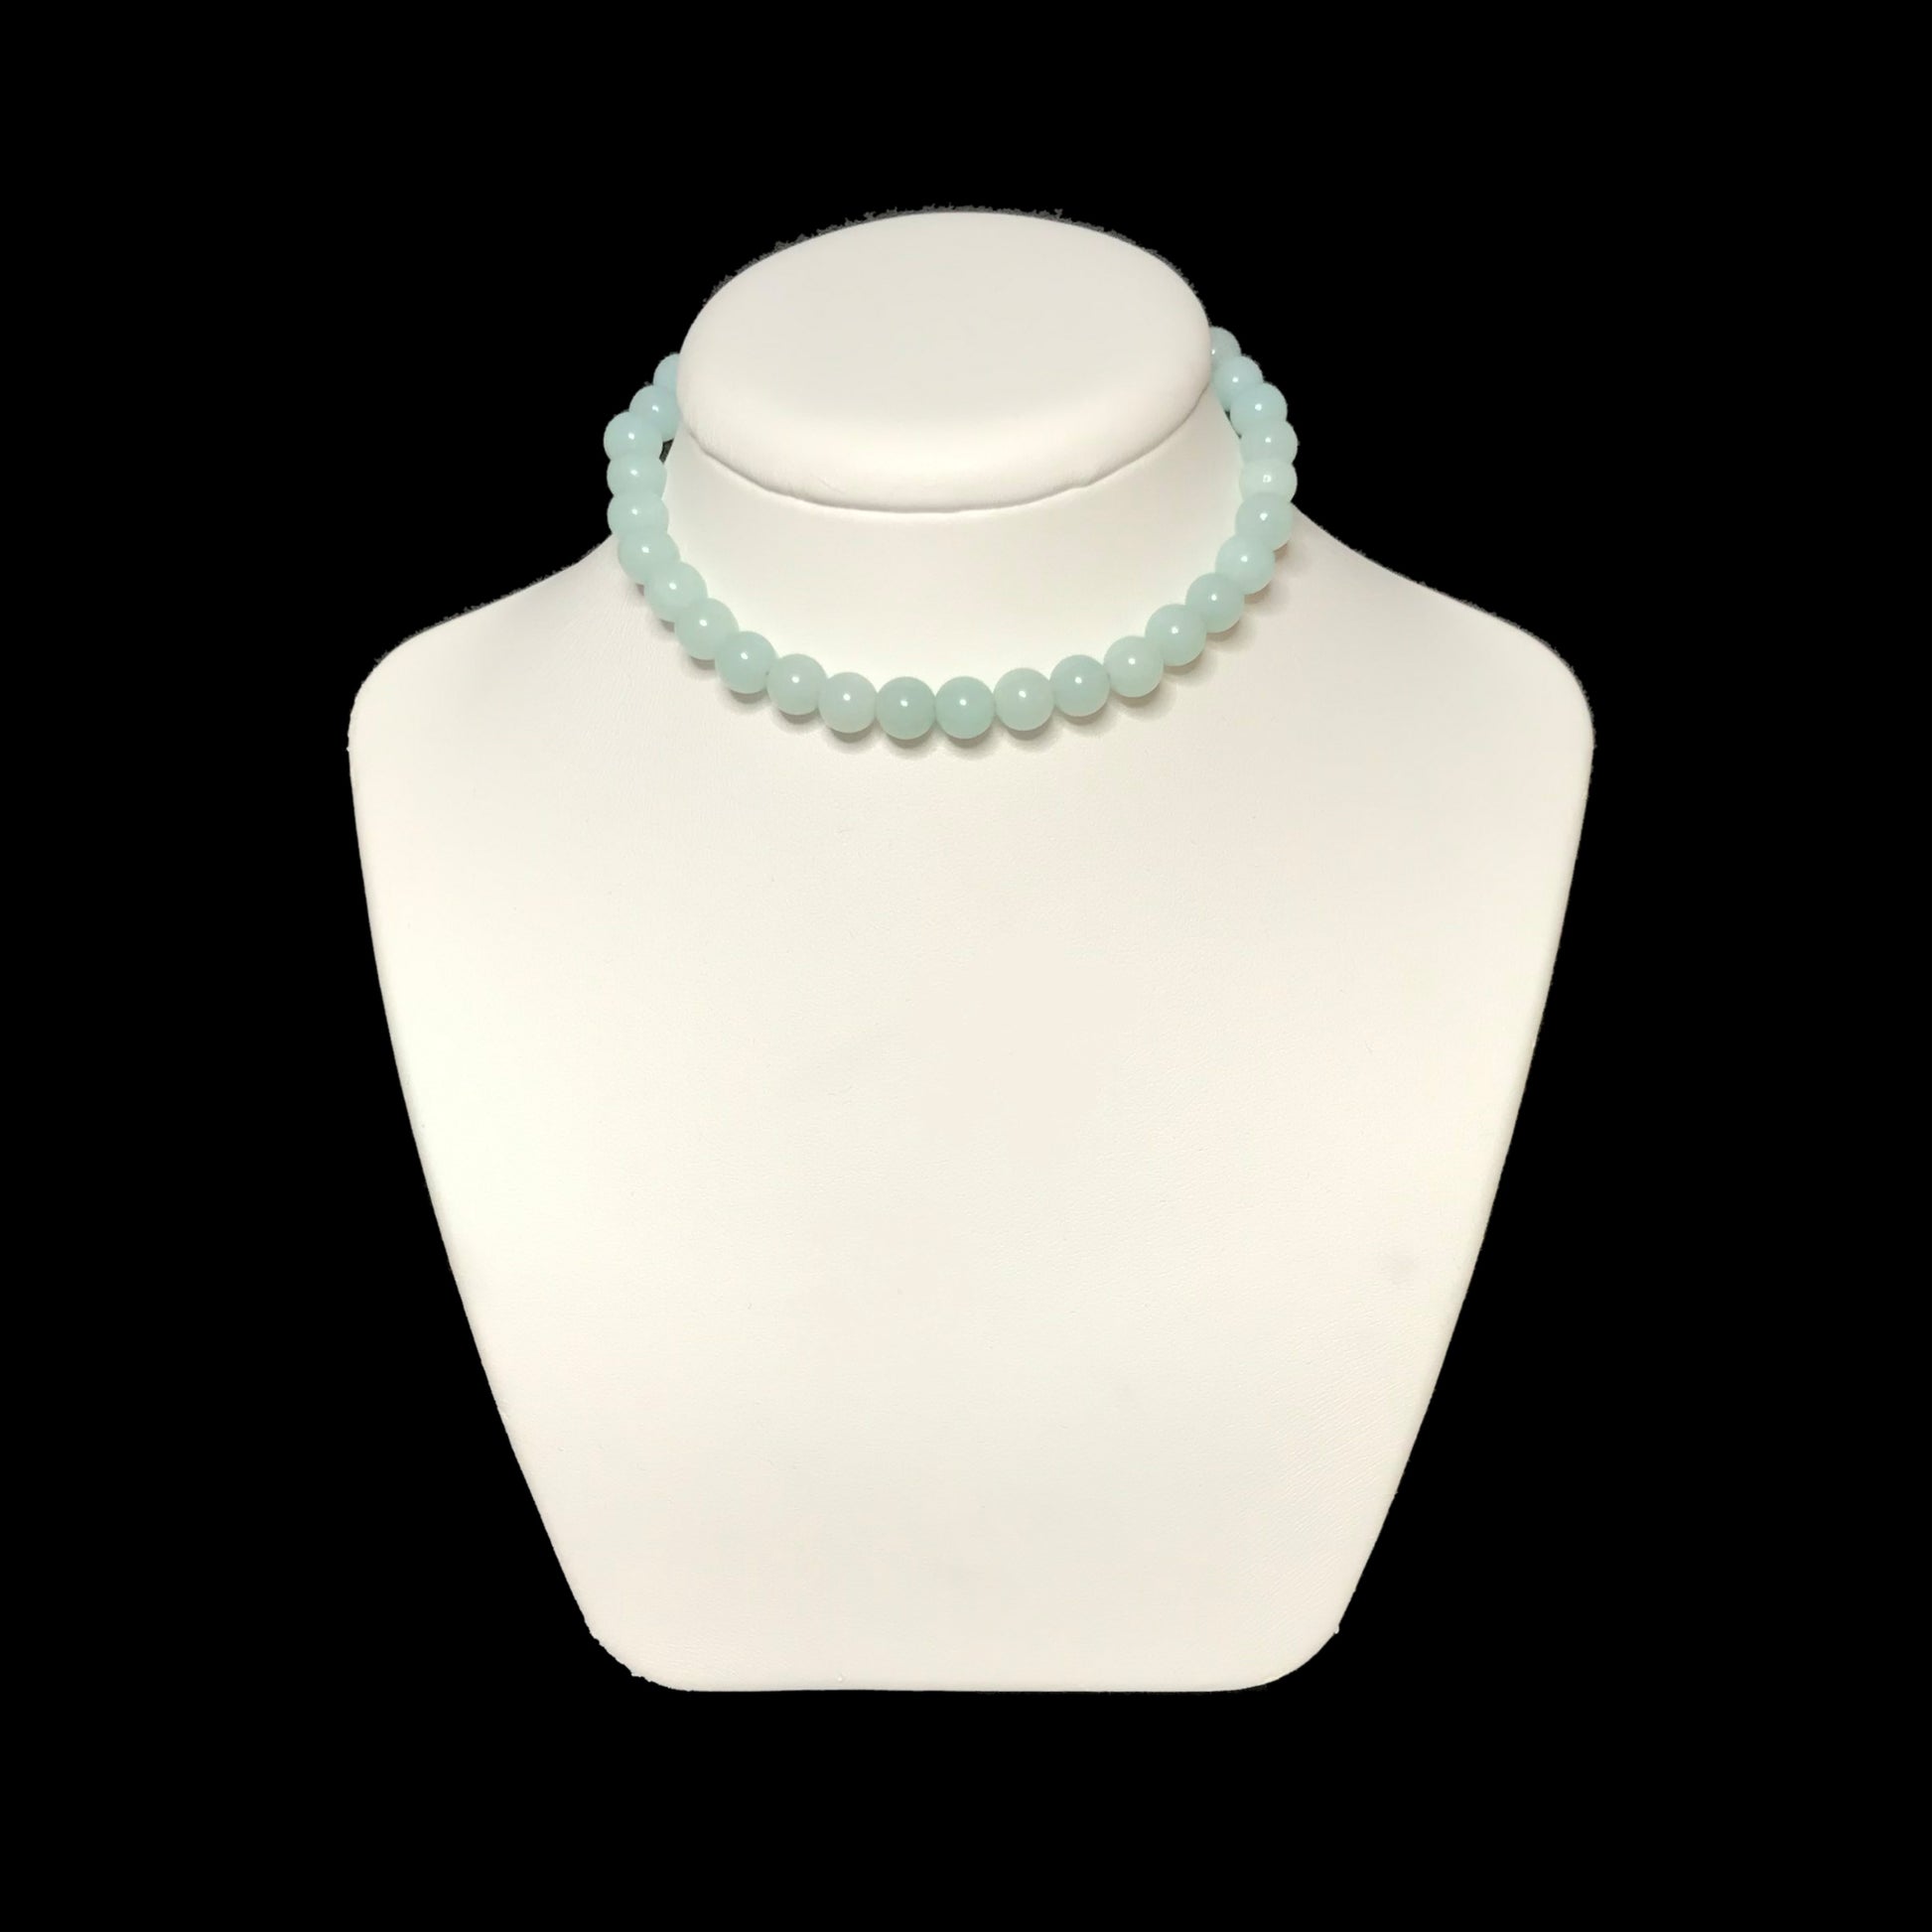 Gemstone necklace on a white stand